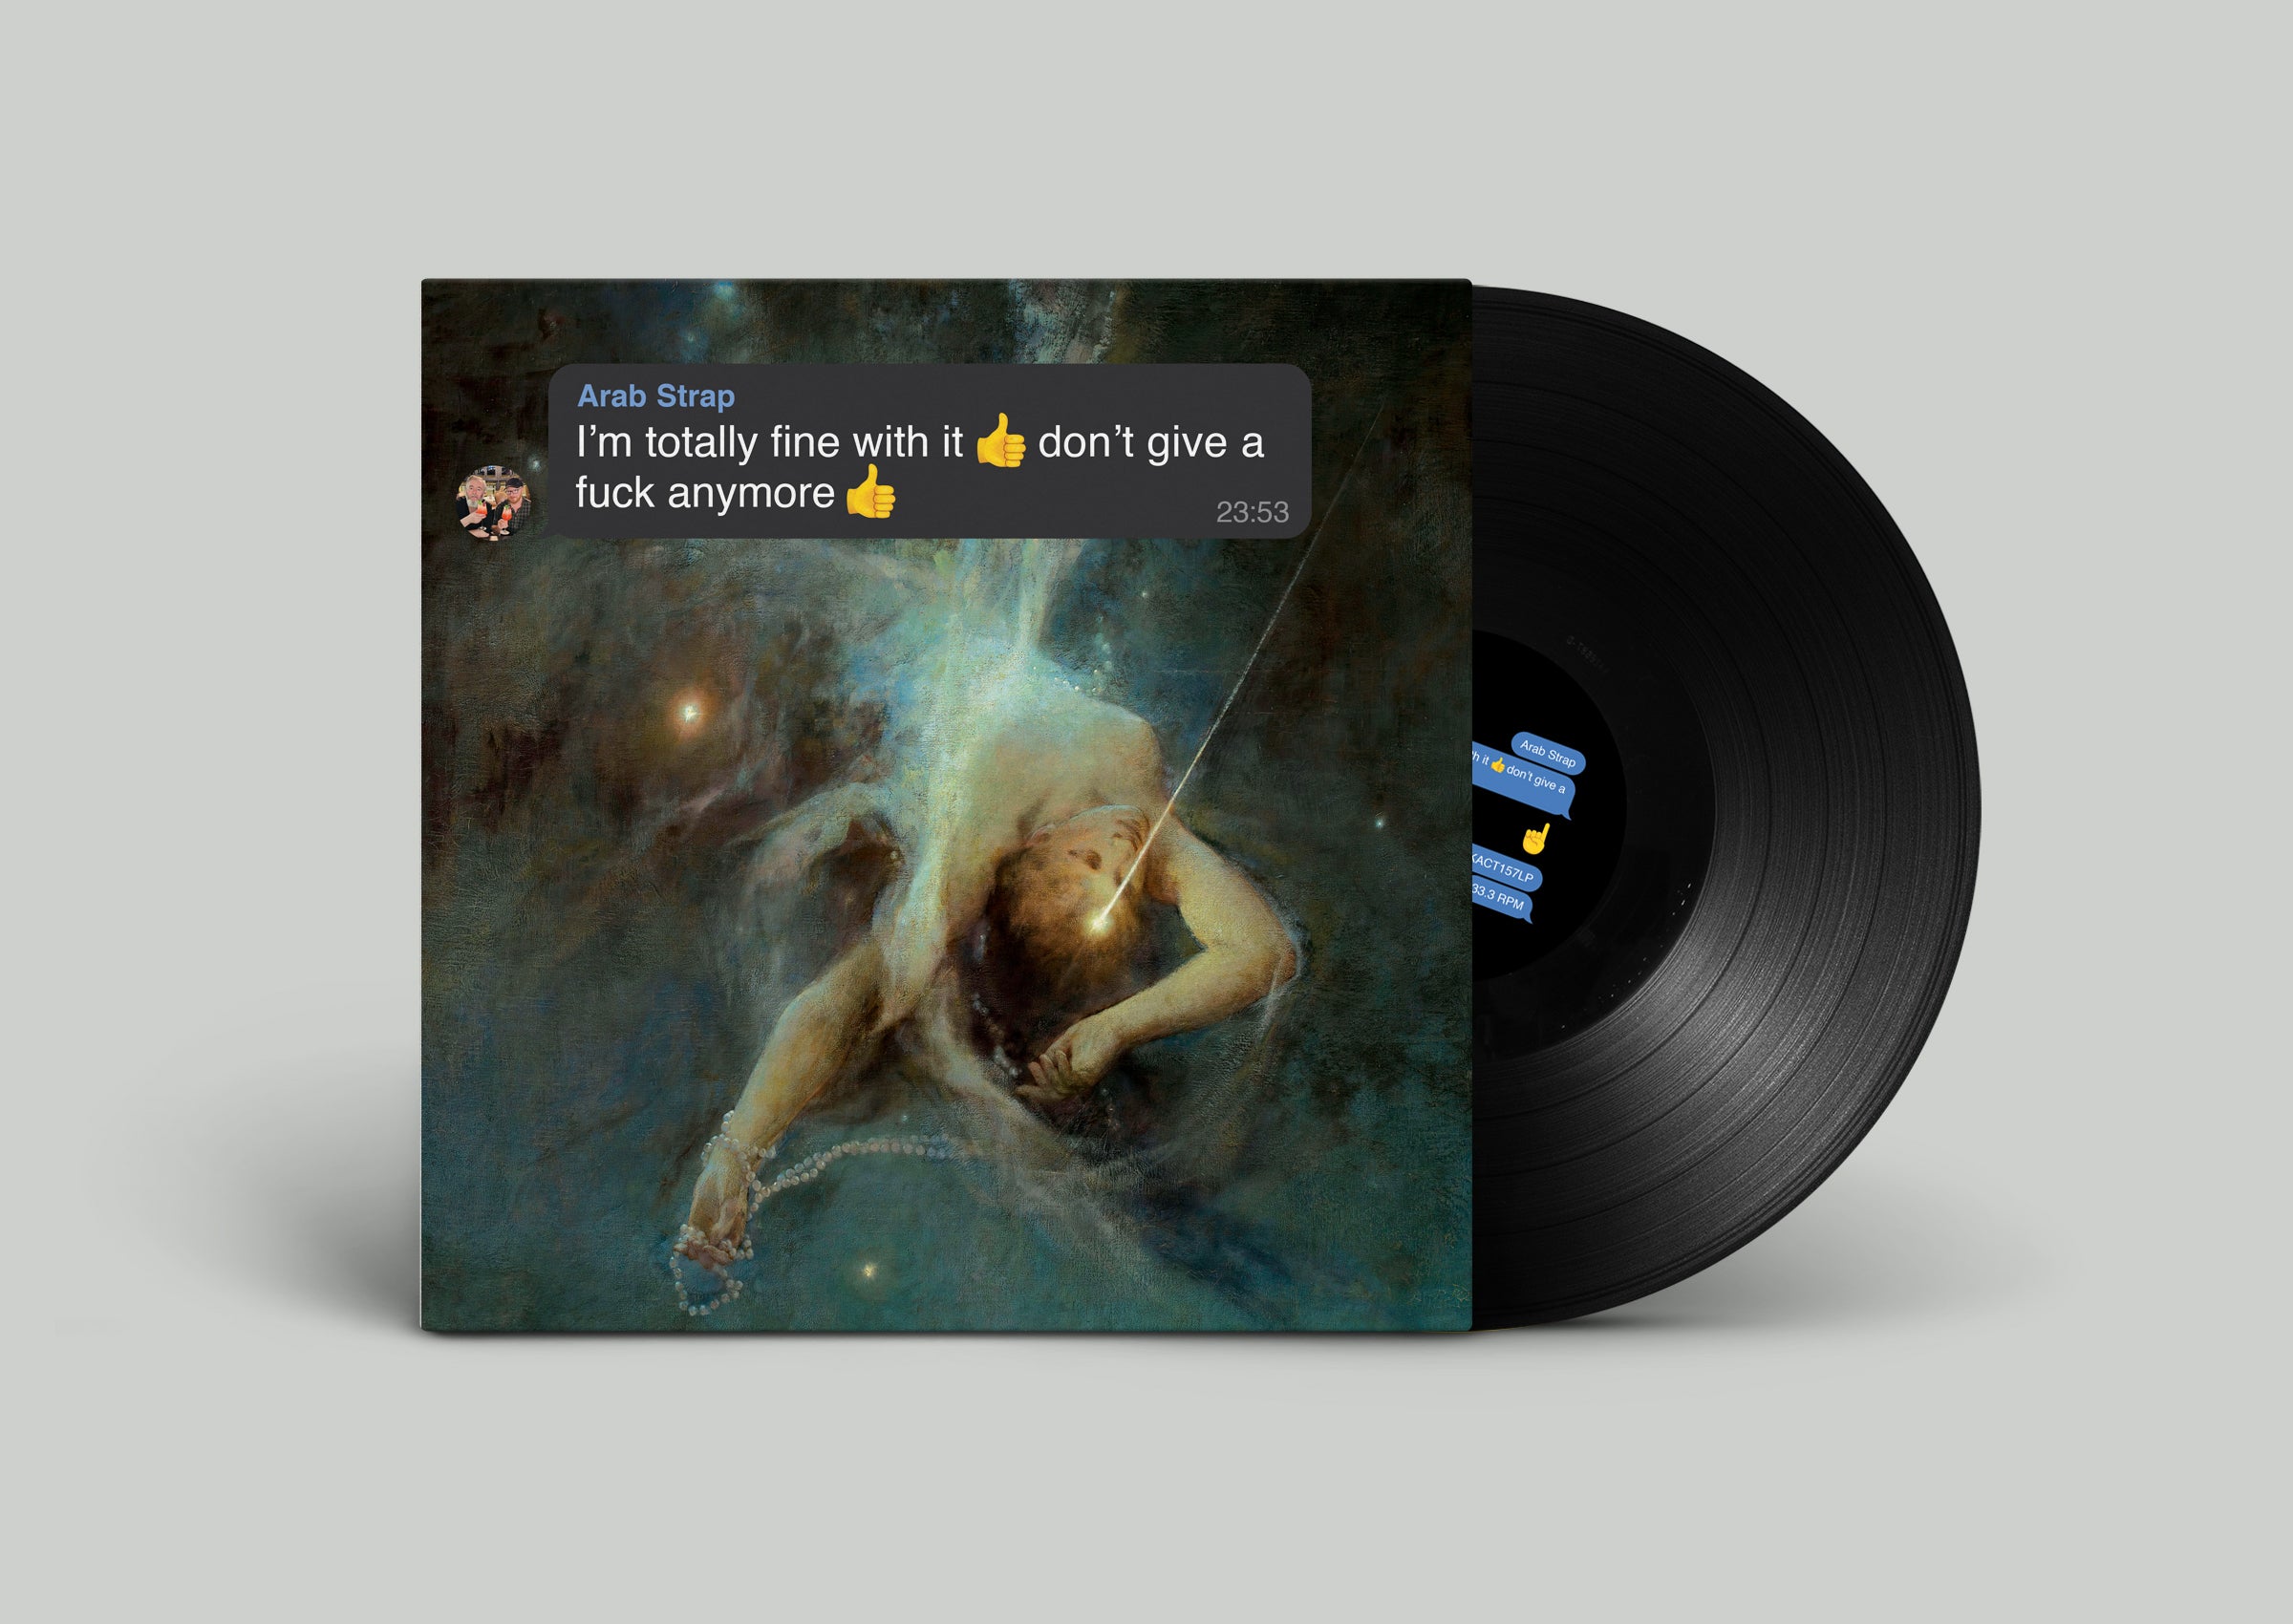 Arab Strap - I'm totally fine with it 👍 don't give a fuck anymore 👍 (Black Vinyl)